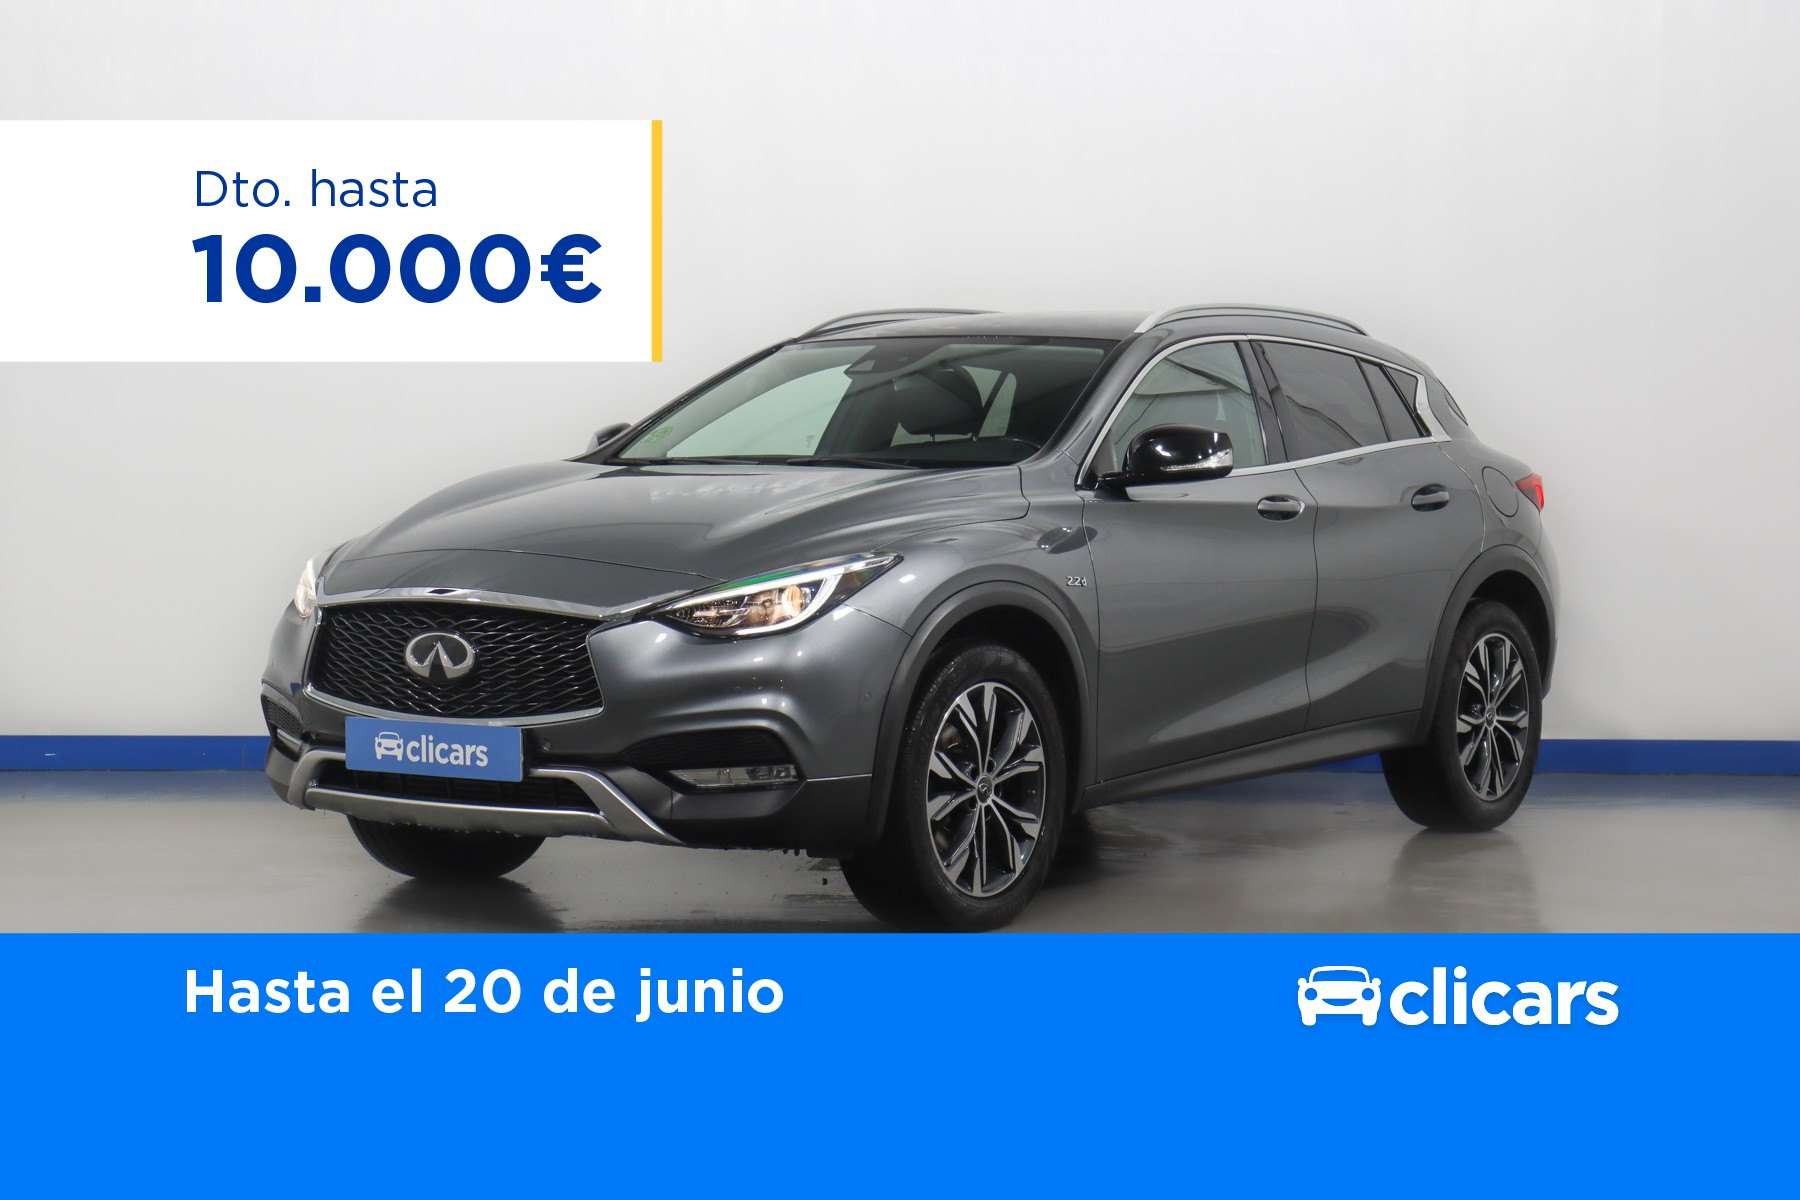 Infiniti QX30 Off-Road/Pick-up in Grey used in BARCELONA for € 21,390.-